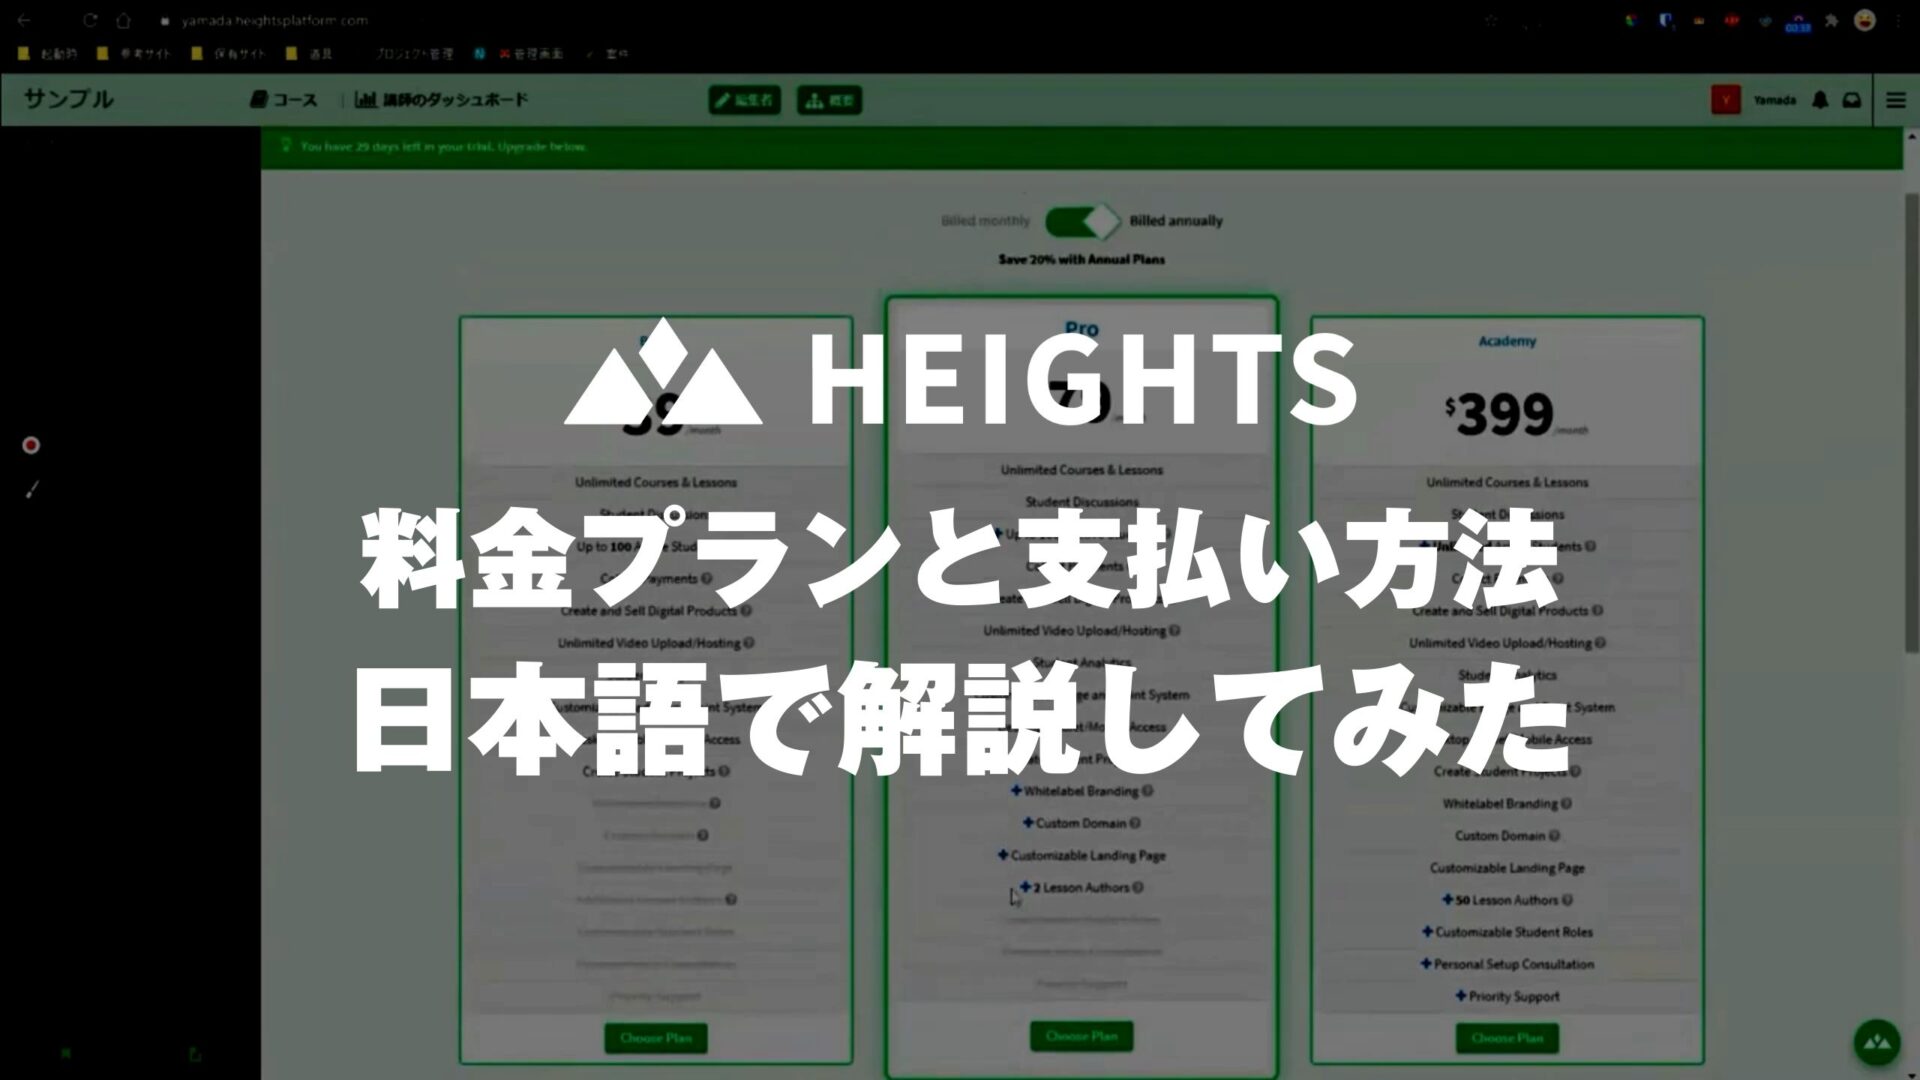 How to Sign Up for Heights Platform and Payment Methods